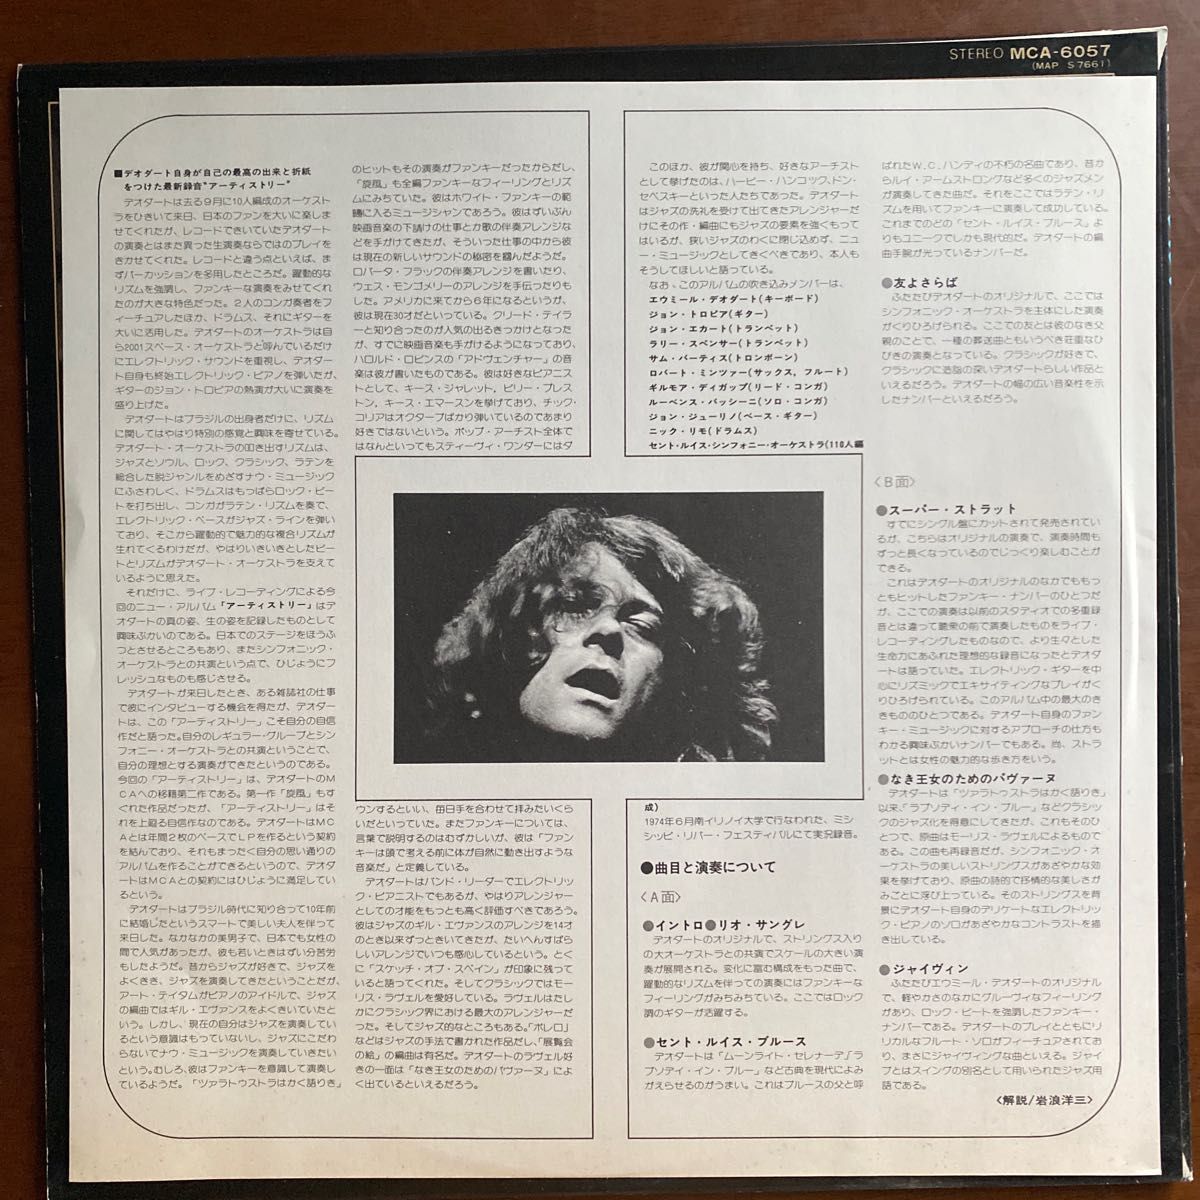 Deodato “Artistry” used record